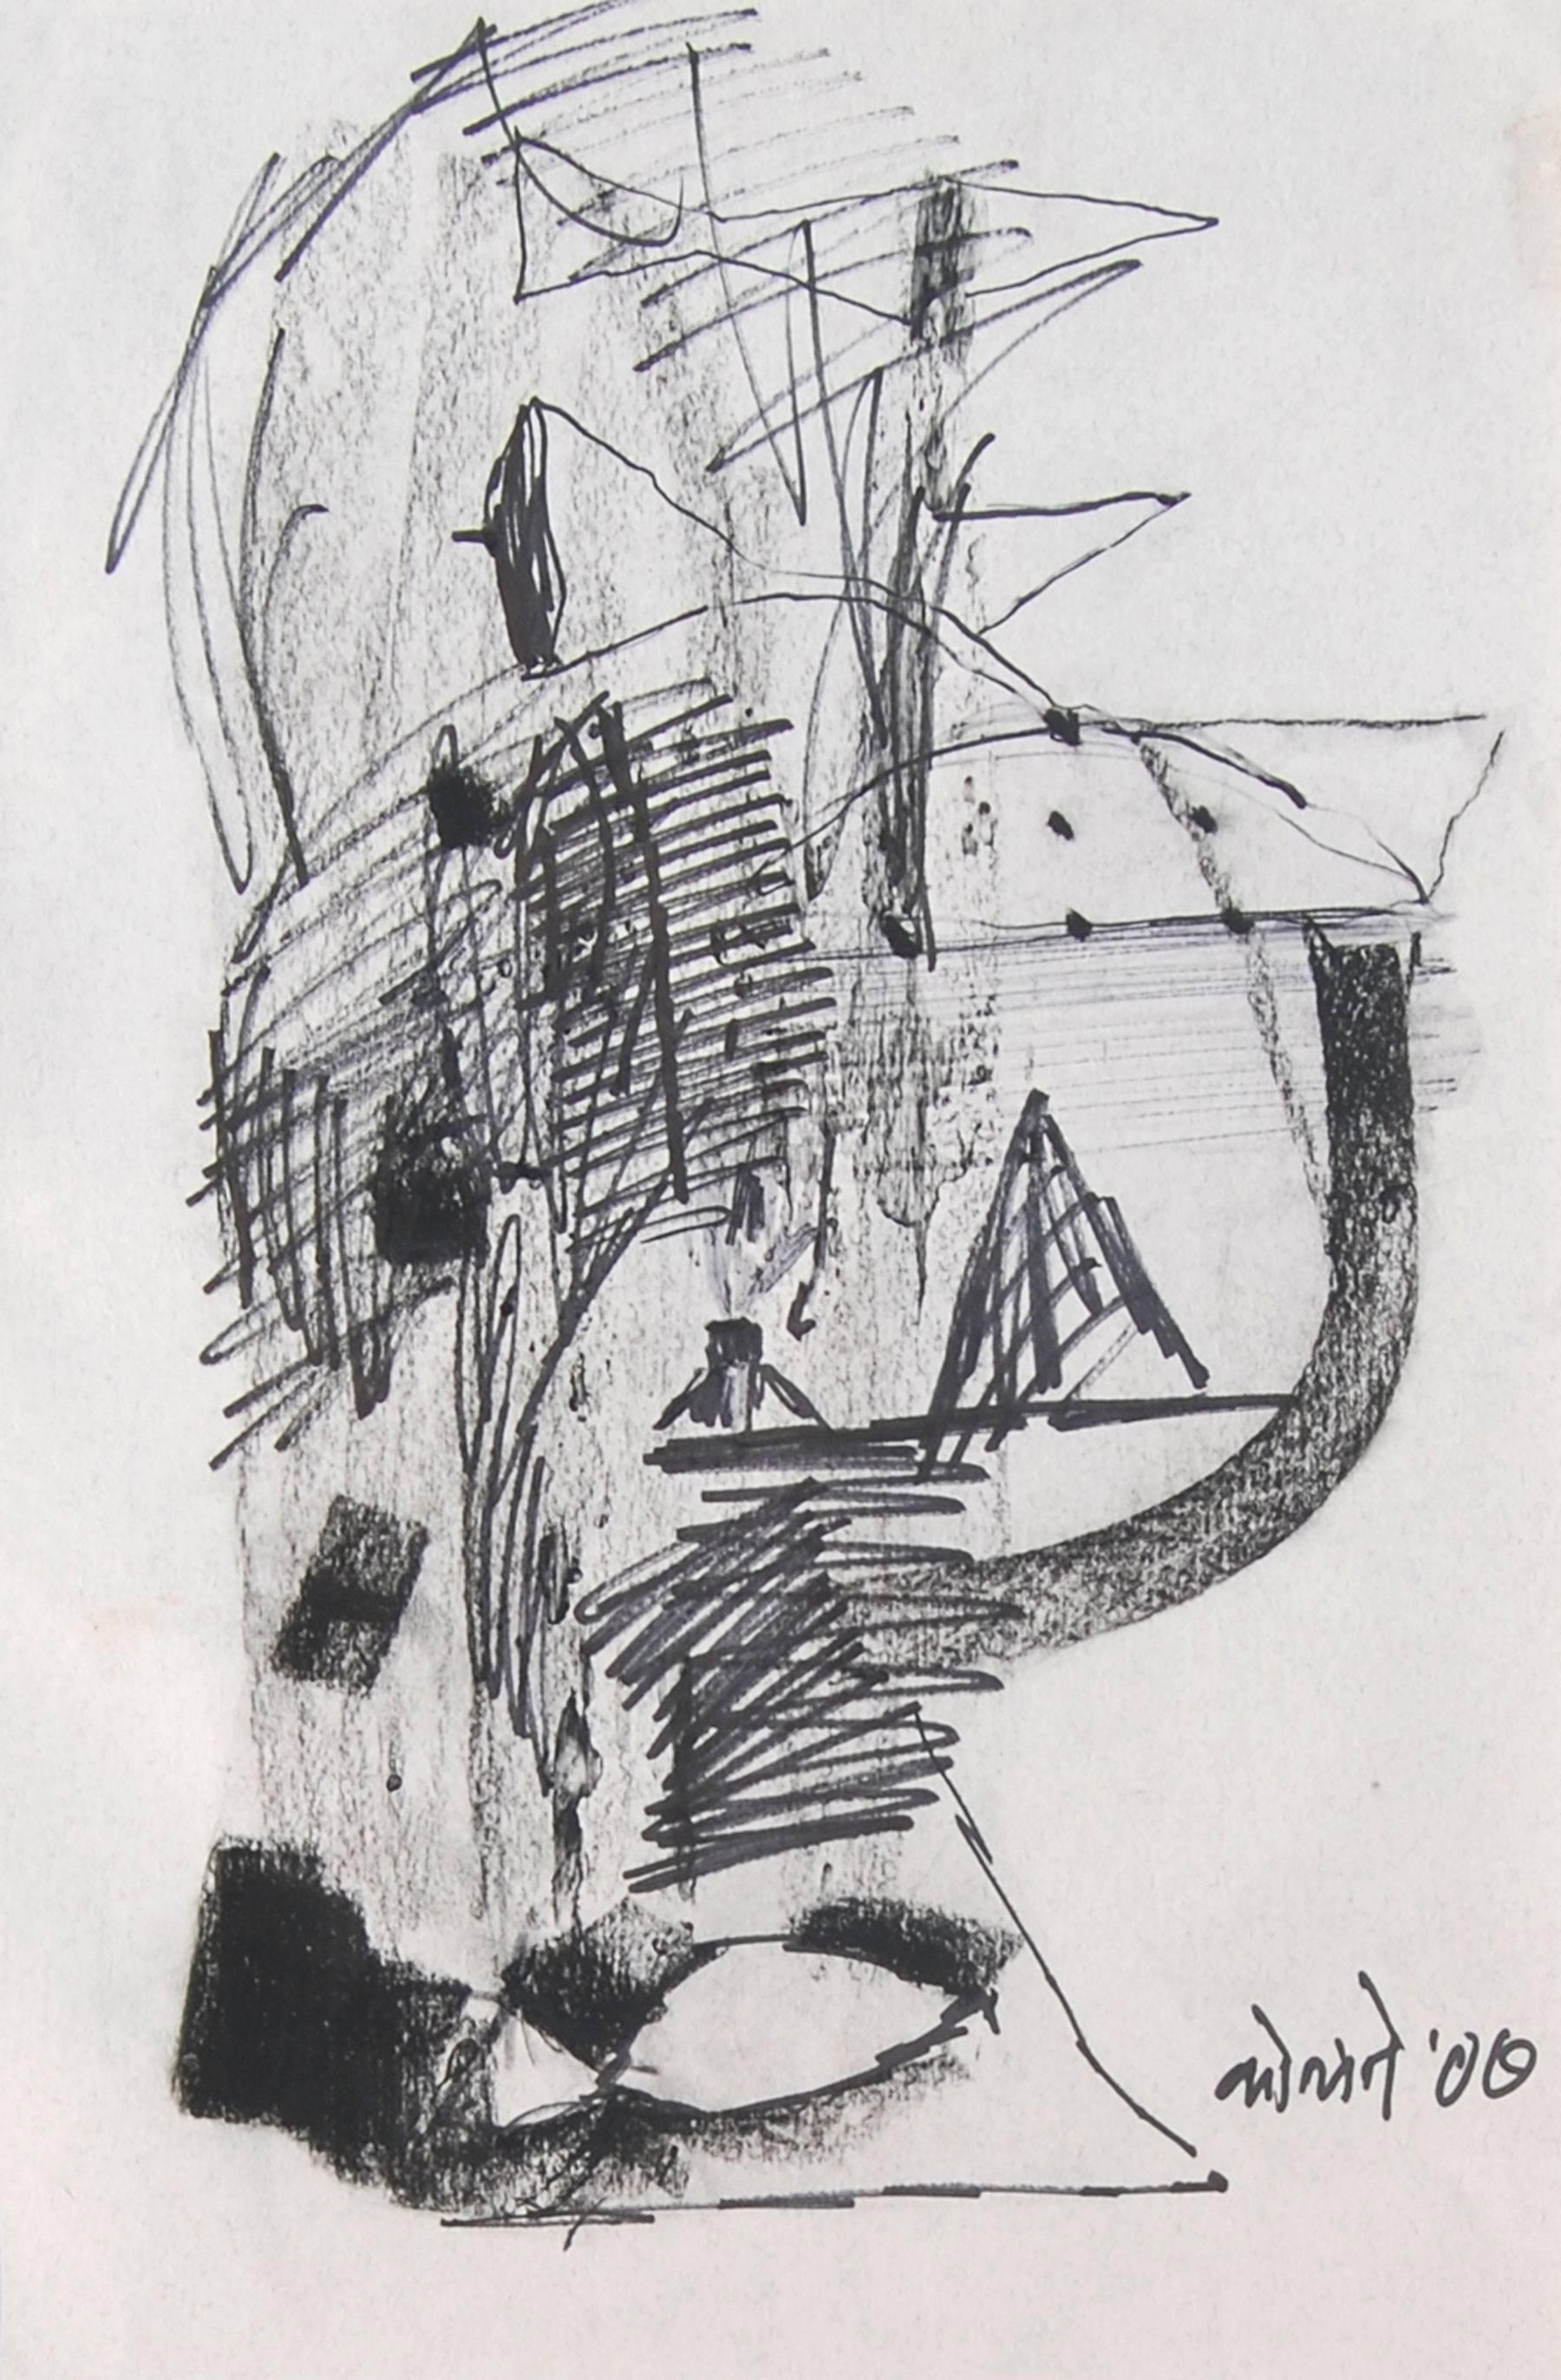 Prabhakar Kolte Abstract Drawing - Landscape Drawing, Charcoal on paper by Modern Indian Artist "In Stock" 